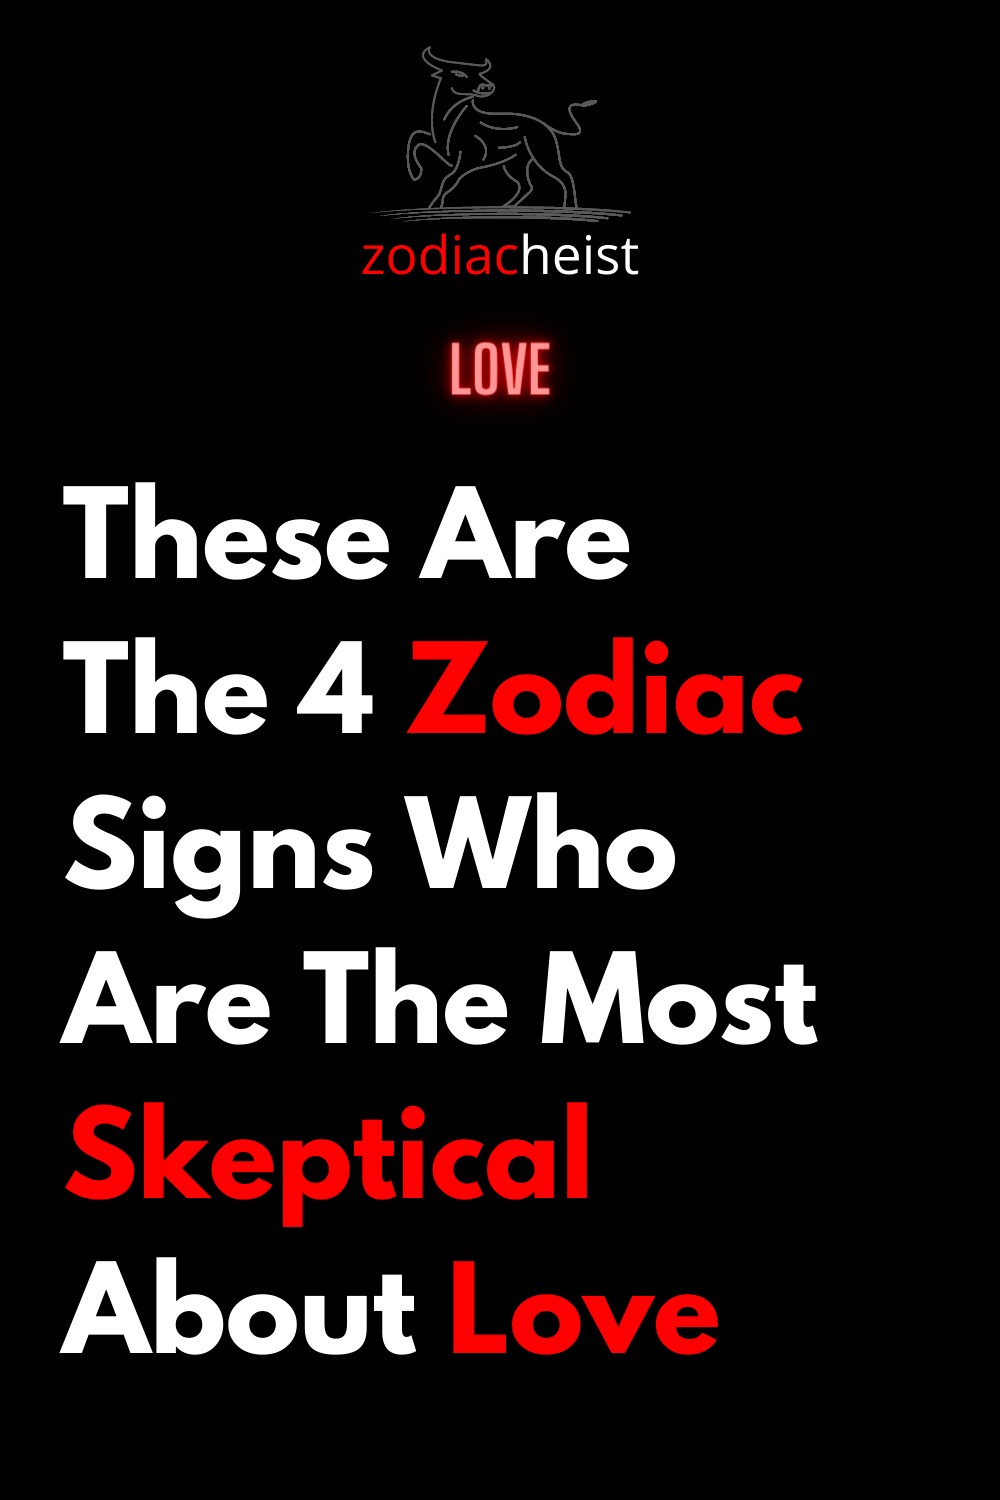 These Are The 4 Zodiac Signs Who Are The Most Skeptical About Love